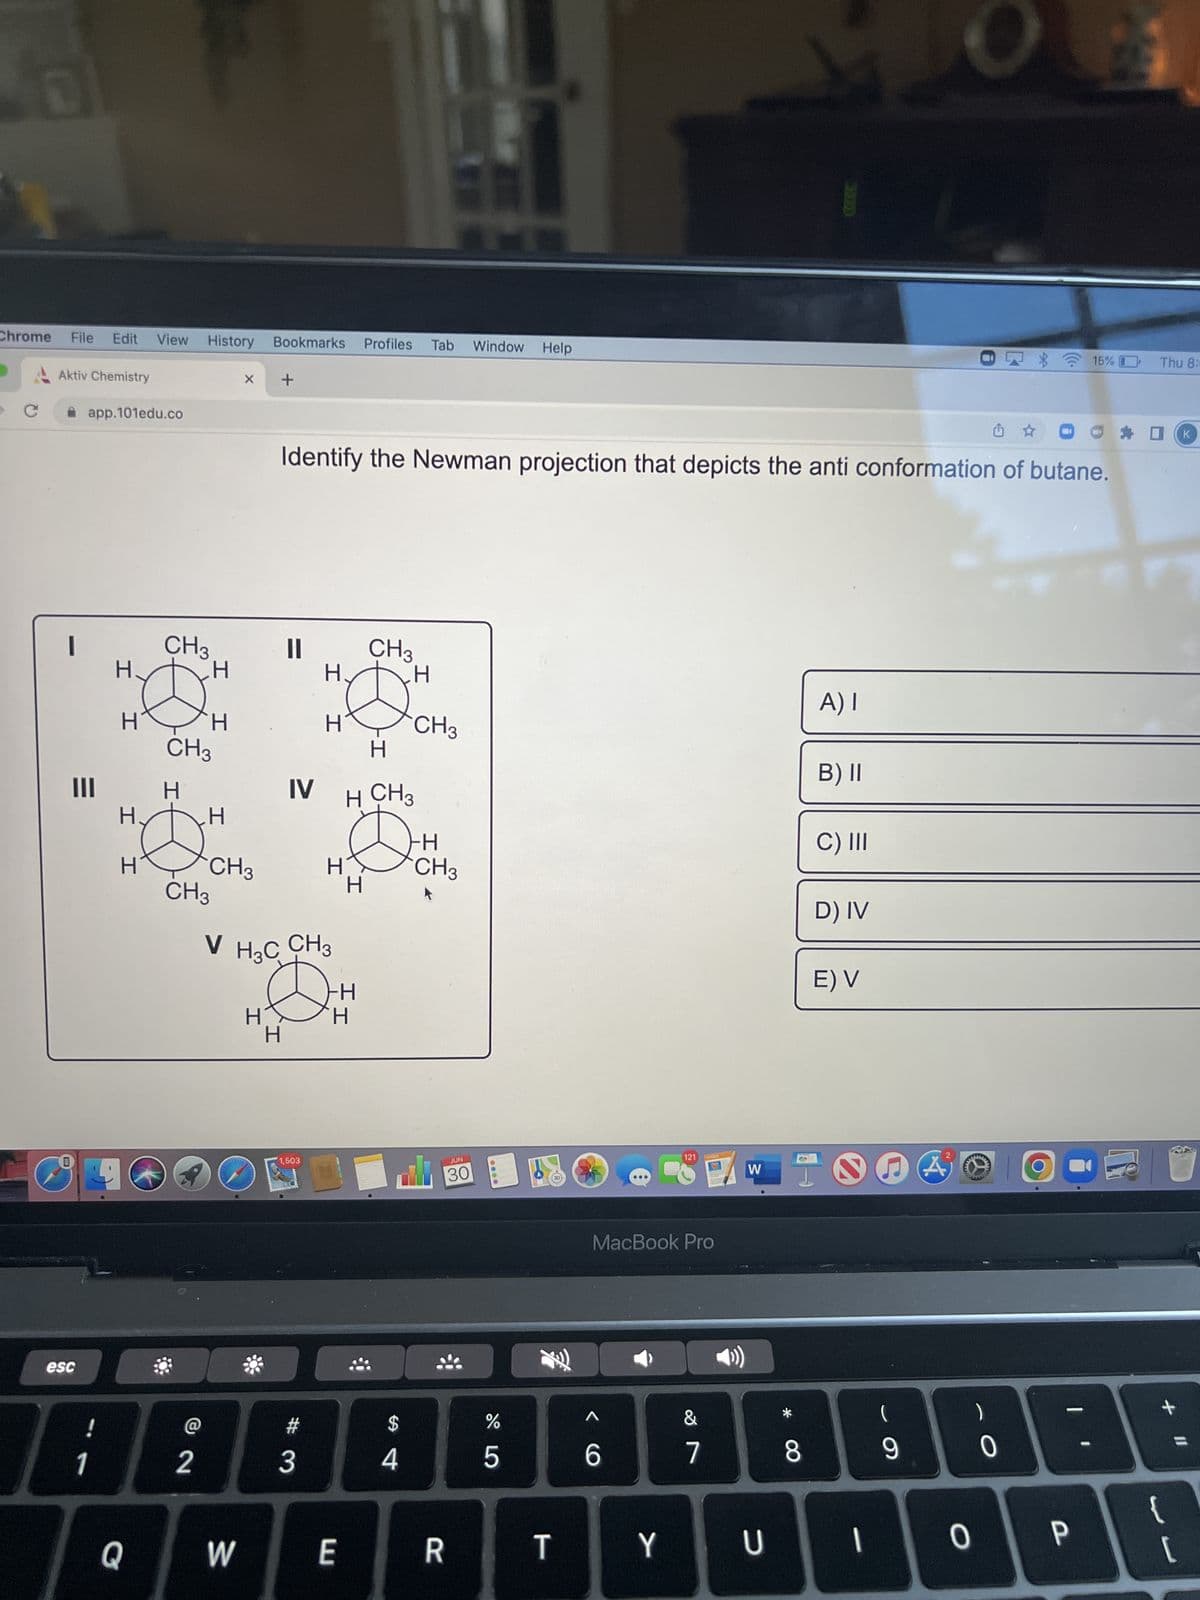 DI
Chrome
с
File Edit View History
Aktiv Chemistry
1
C
app.101edu.co
E
|||
esc
!
1
H
H
Н.
Q
CH3
CH3
H
@
H
CH3
2
I I
H
CH3
V
X
W
Bookmarks Profiles Tab Window Help
H
+
H
||
Identify the Newman projection that depicts the anti conformation of butane.
H3C CH3
1,503
H
#
H
3
IV H CH 3
HE
H
D
FH
CH3
I
E
H
$
H
4
CH3
∙H
CH3
JUN
30
R
%
5
T
8
6
121
MacBook Pro
&
PAGES
7
W
Y U
1
8
A) I
B) II
C) III
D) IV
E) V
~
-
9
A
0
0
O
15% (
P
Thu 8:
+ 11
{
[
K